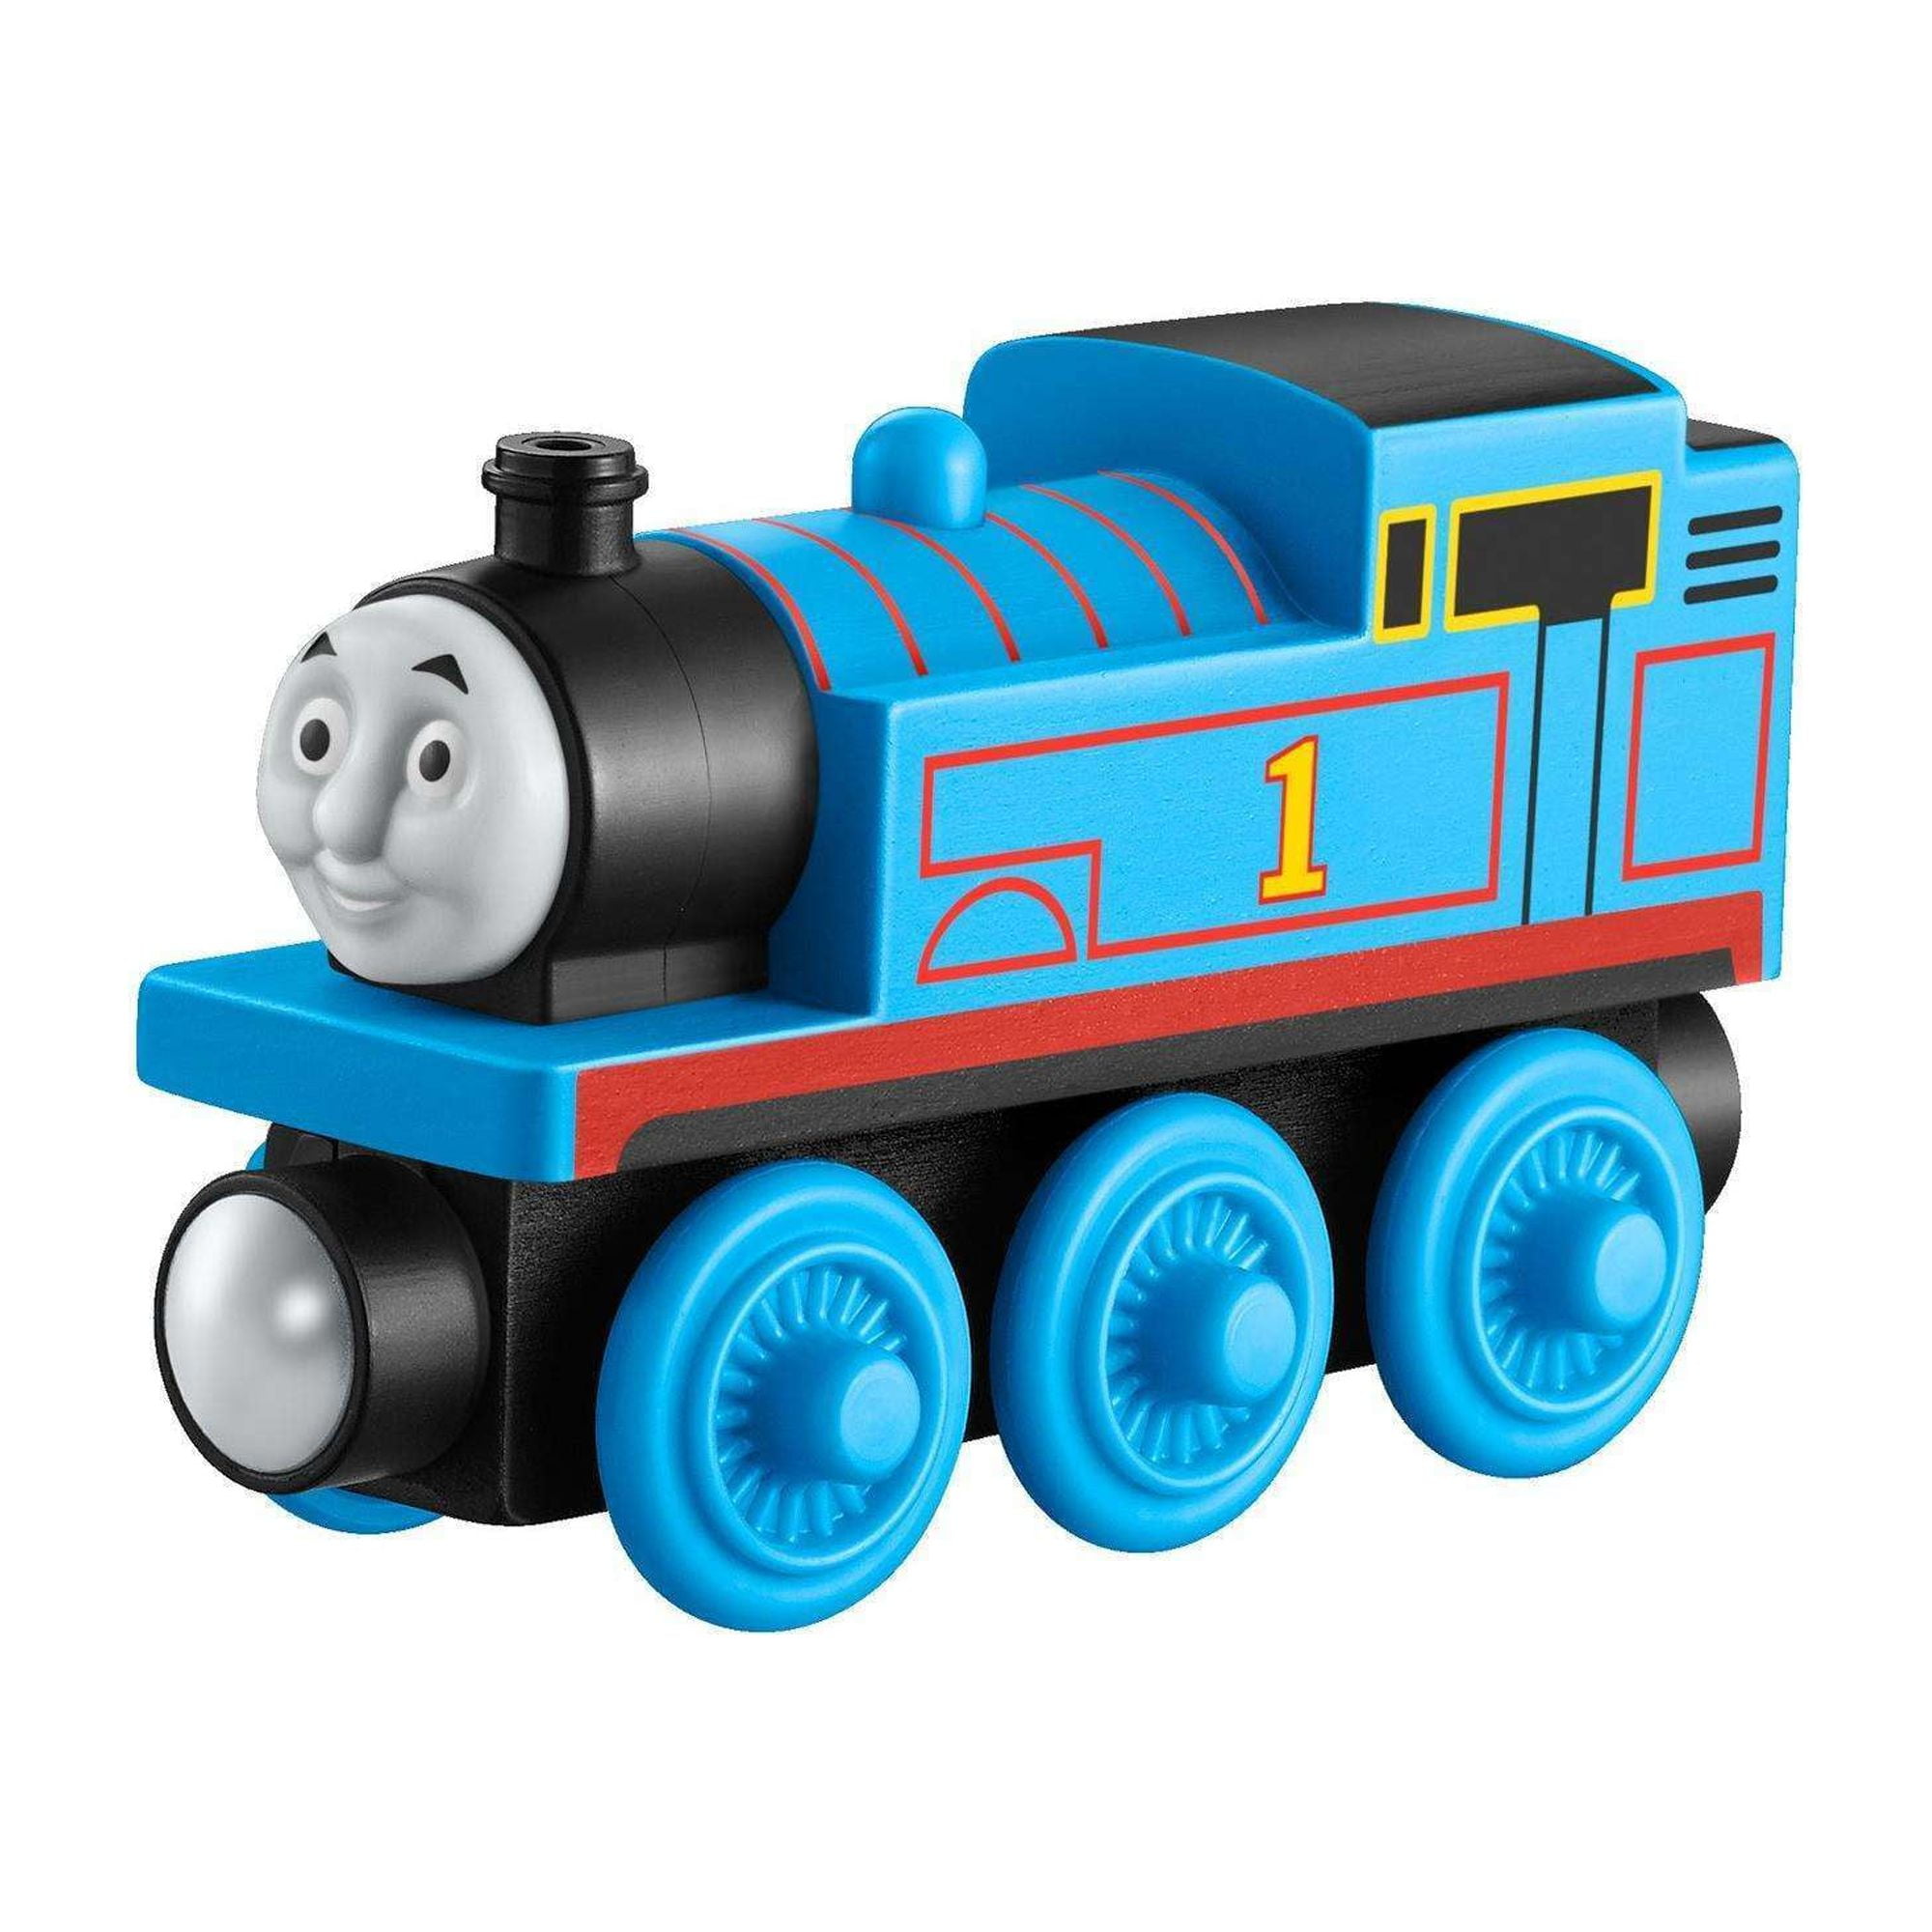 Thomas & Friends: The Adventure Begins Clip: Thomas gets his new livery 